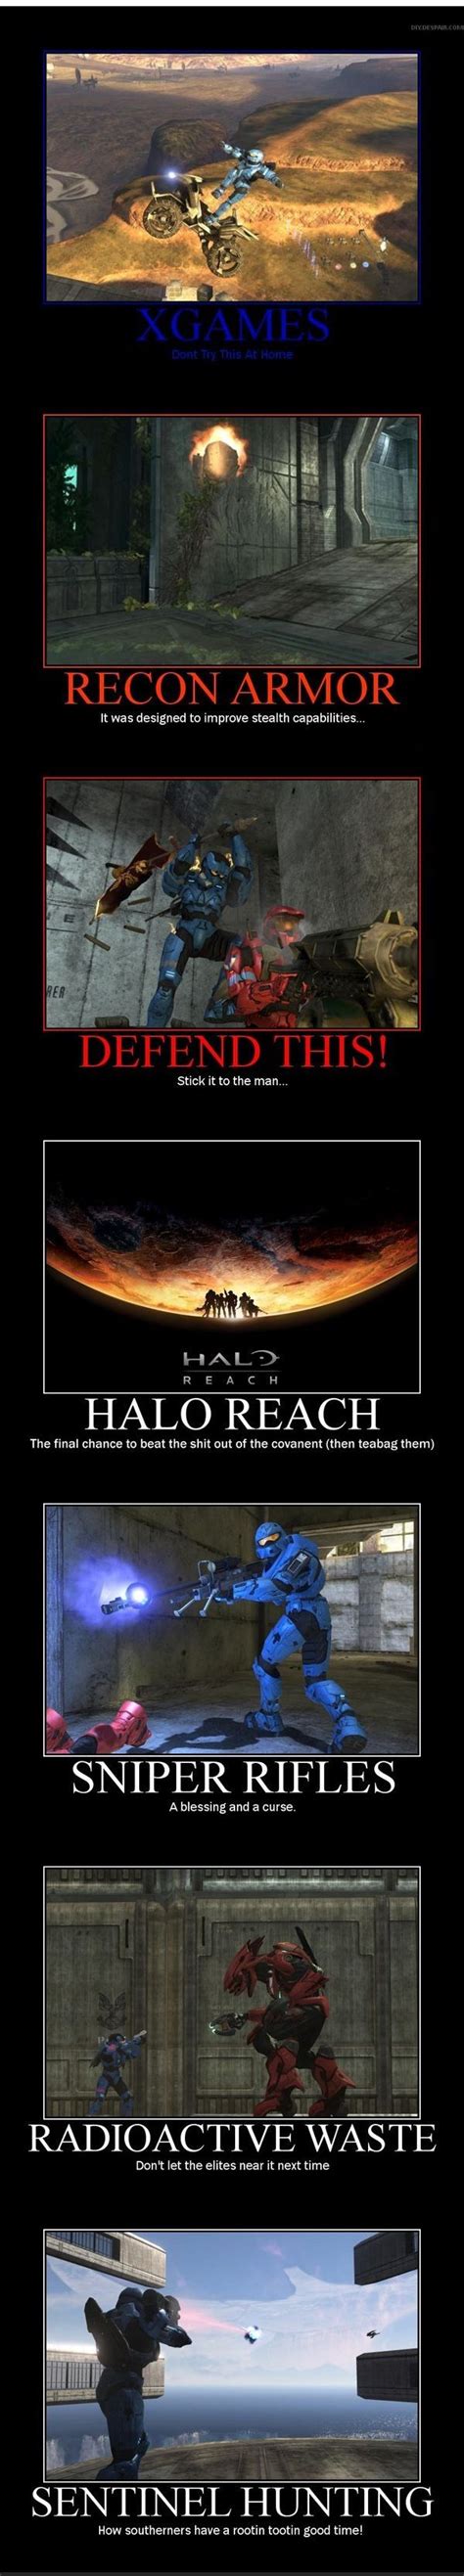 Halo One Of The Best Series Ever Made Halo Funny